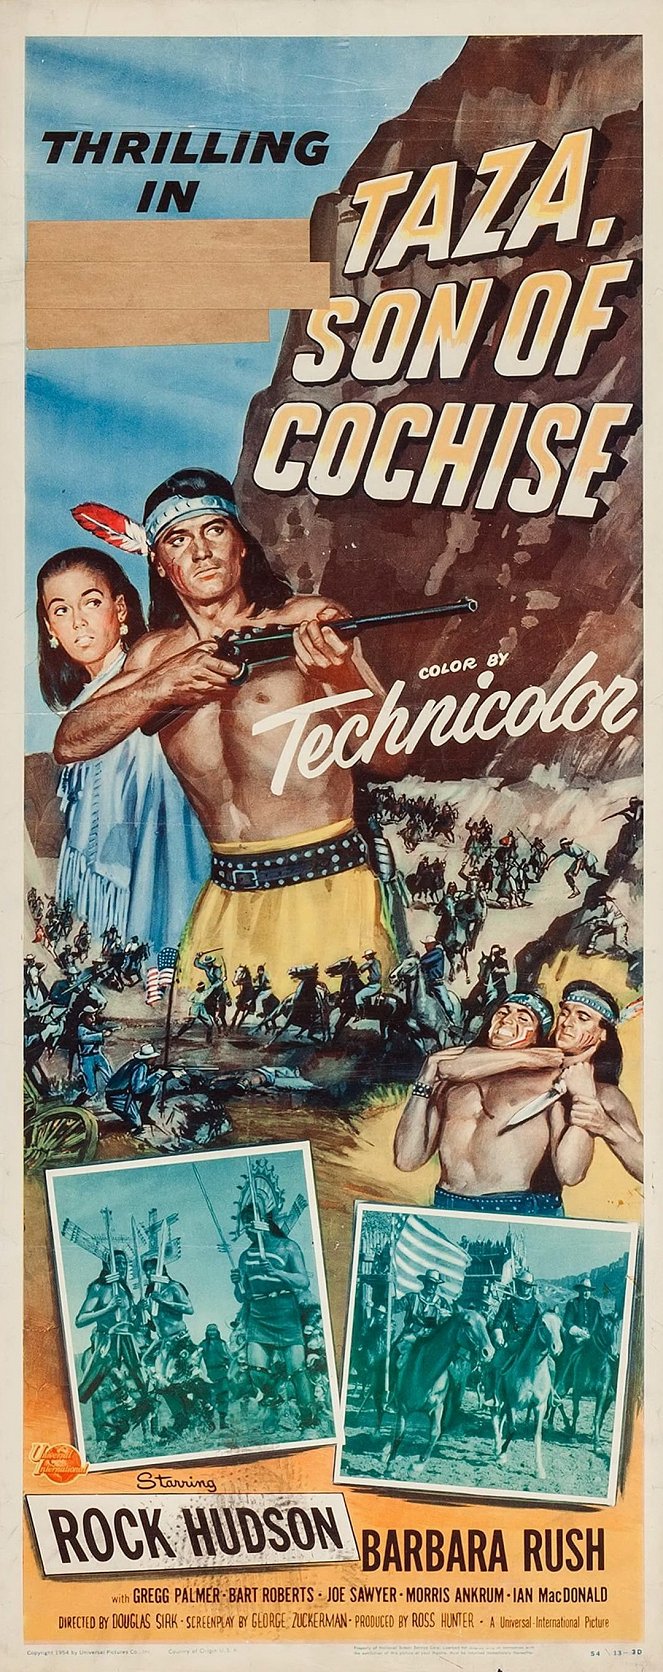 Taza, Son of Cochise - Plakate